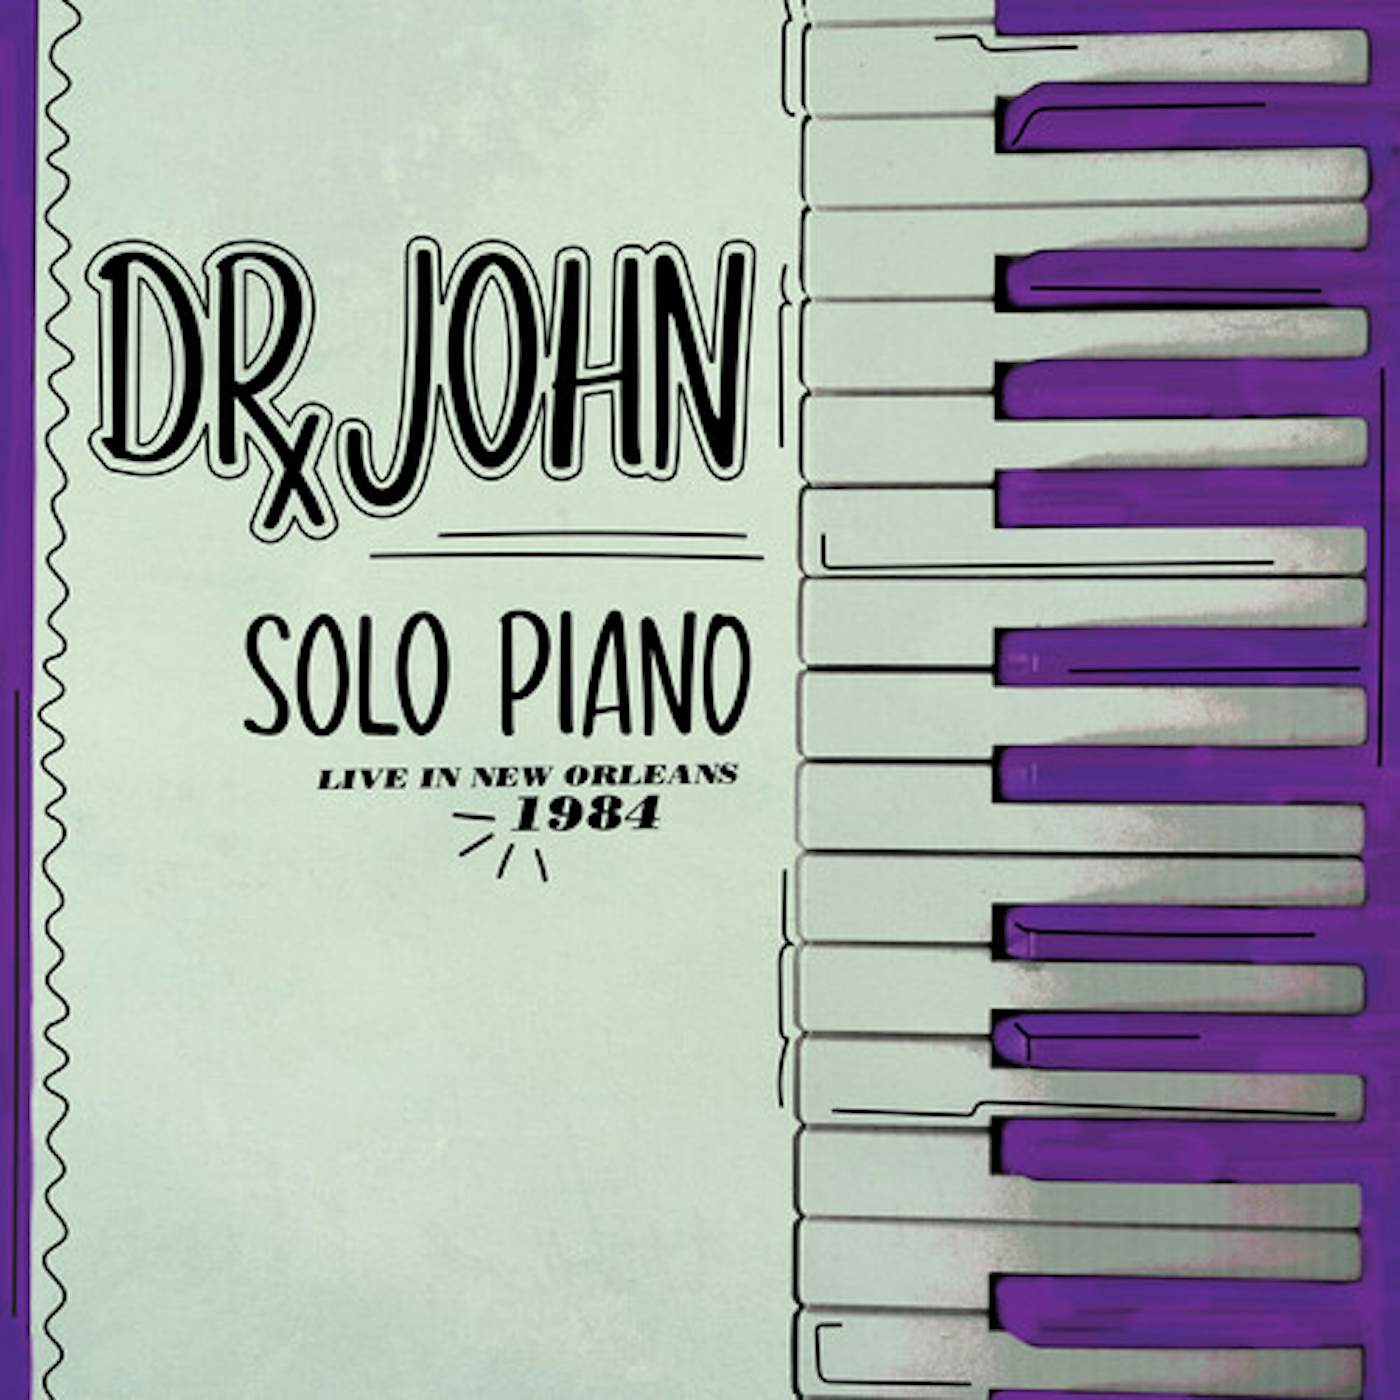 Dr. John Solo Piano Live in New Orleans 1984 Vinyl Record